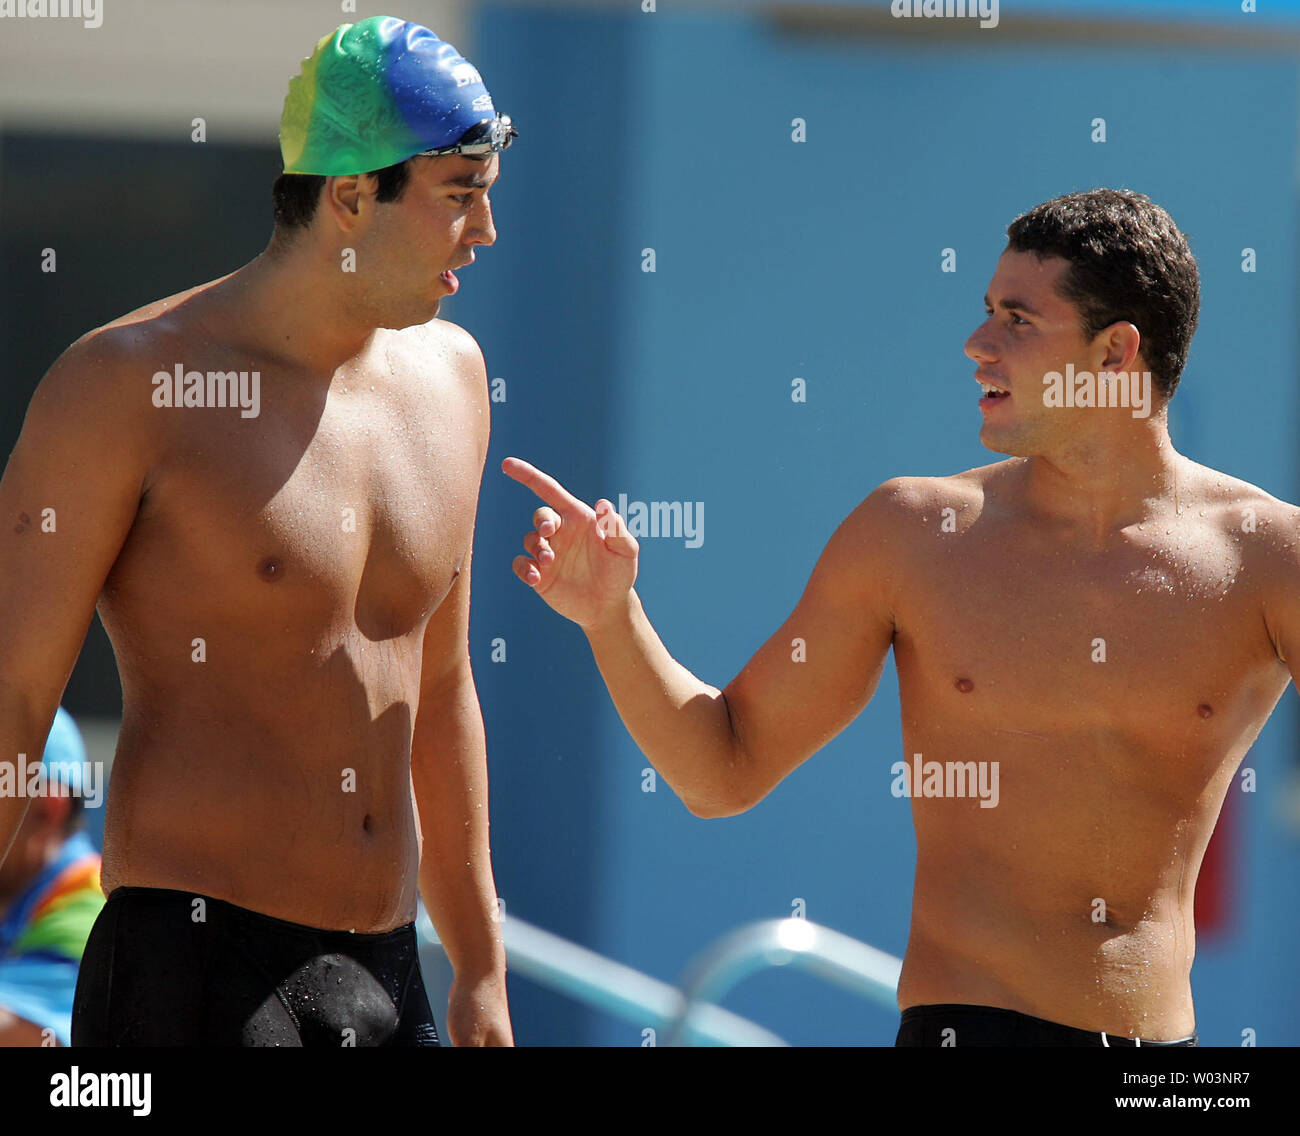 Brazilian swimmers Thiago Pereira (R) and Henrique Barbosa leave the pool following the 200-meter breakstroke finals in Rio de Janeiro, Brazil in the XV Pan American Games on July 21, 2007. Pereira won gold with a time of 2:13.51 minutes while Barbosa took the silver in 2:13.83 minutes. (UPI Photo/Grace Chiu). Stock Photo